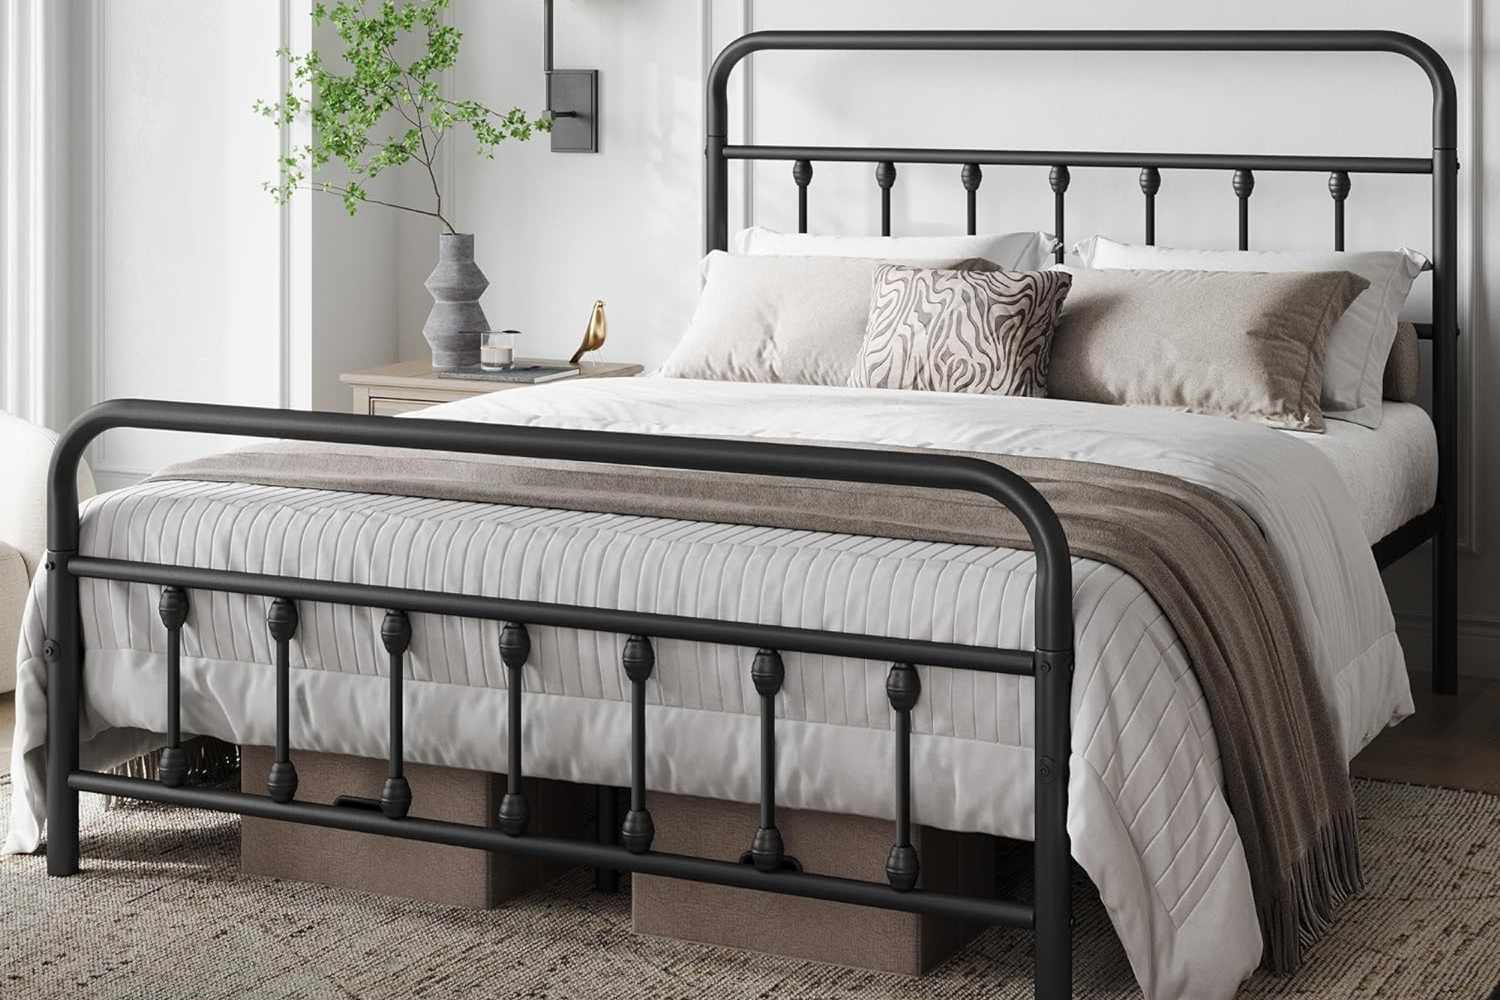 Amazon Is Packed with Bedroom Furniture Deals That Go Up to 66% Off [Video]